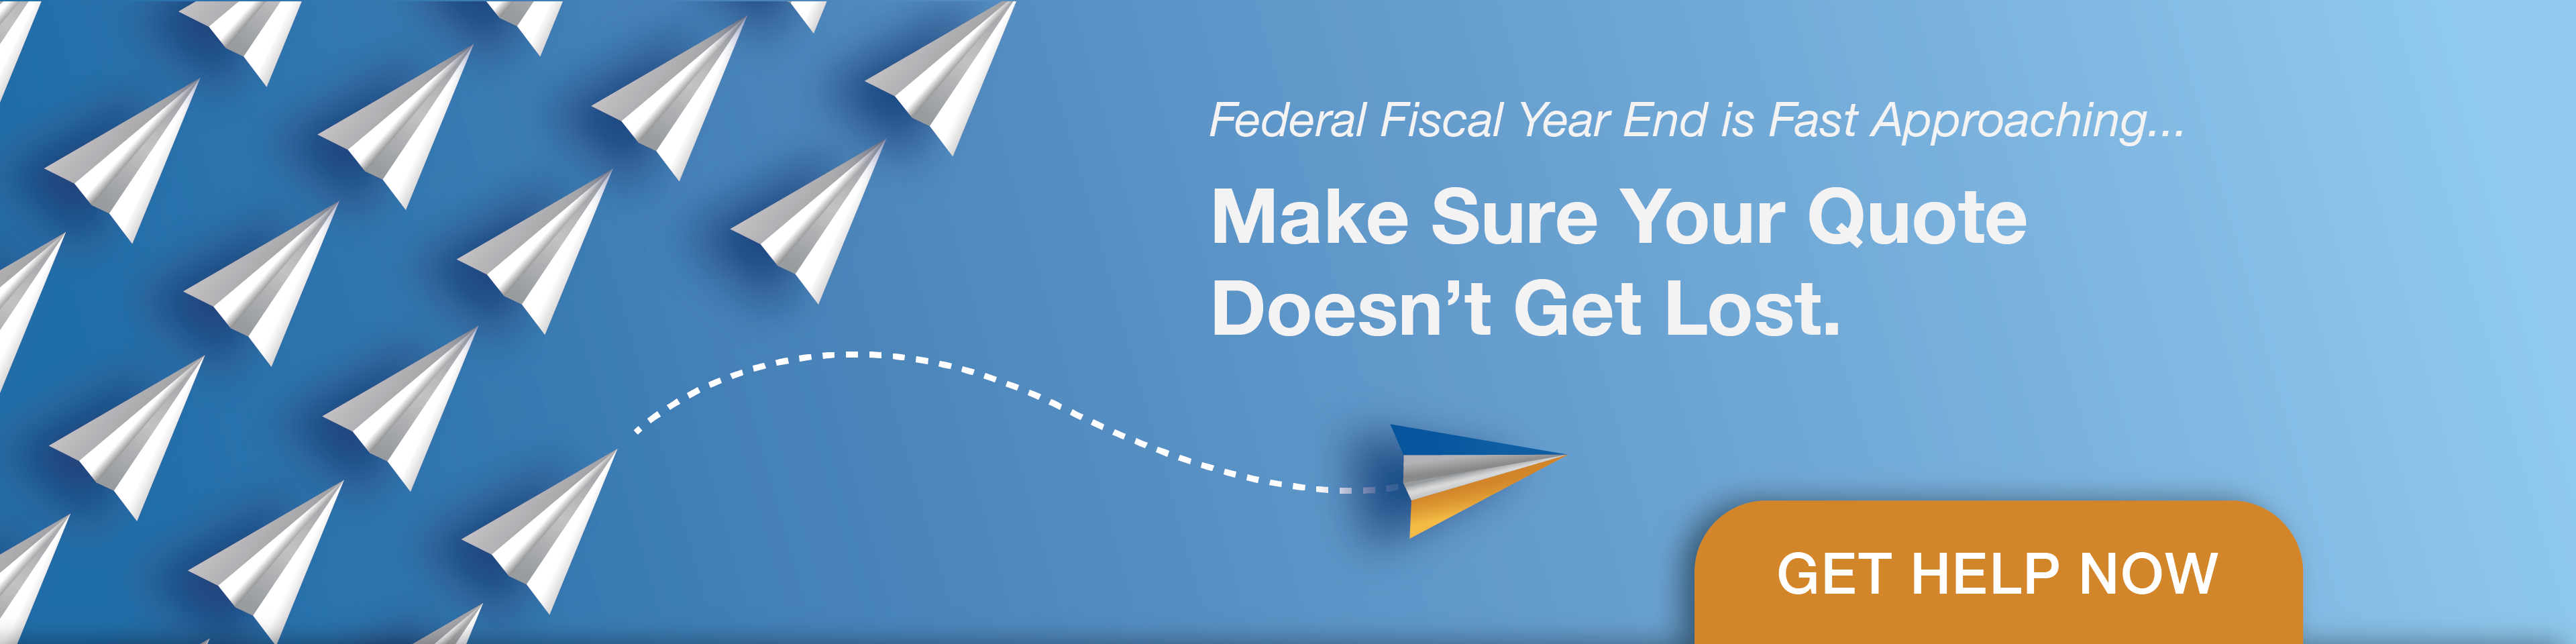 Federal Fiscal Year End is Fast Approaching, Make Sure Your Quote Doesn't Get Lost